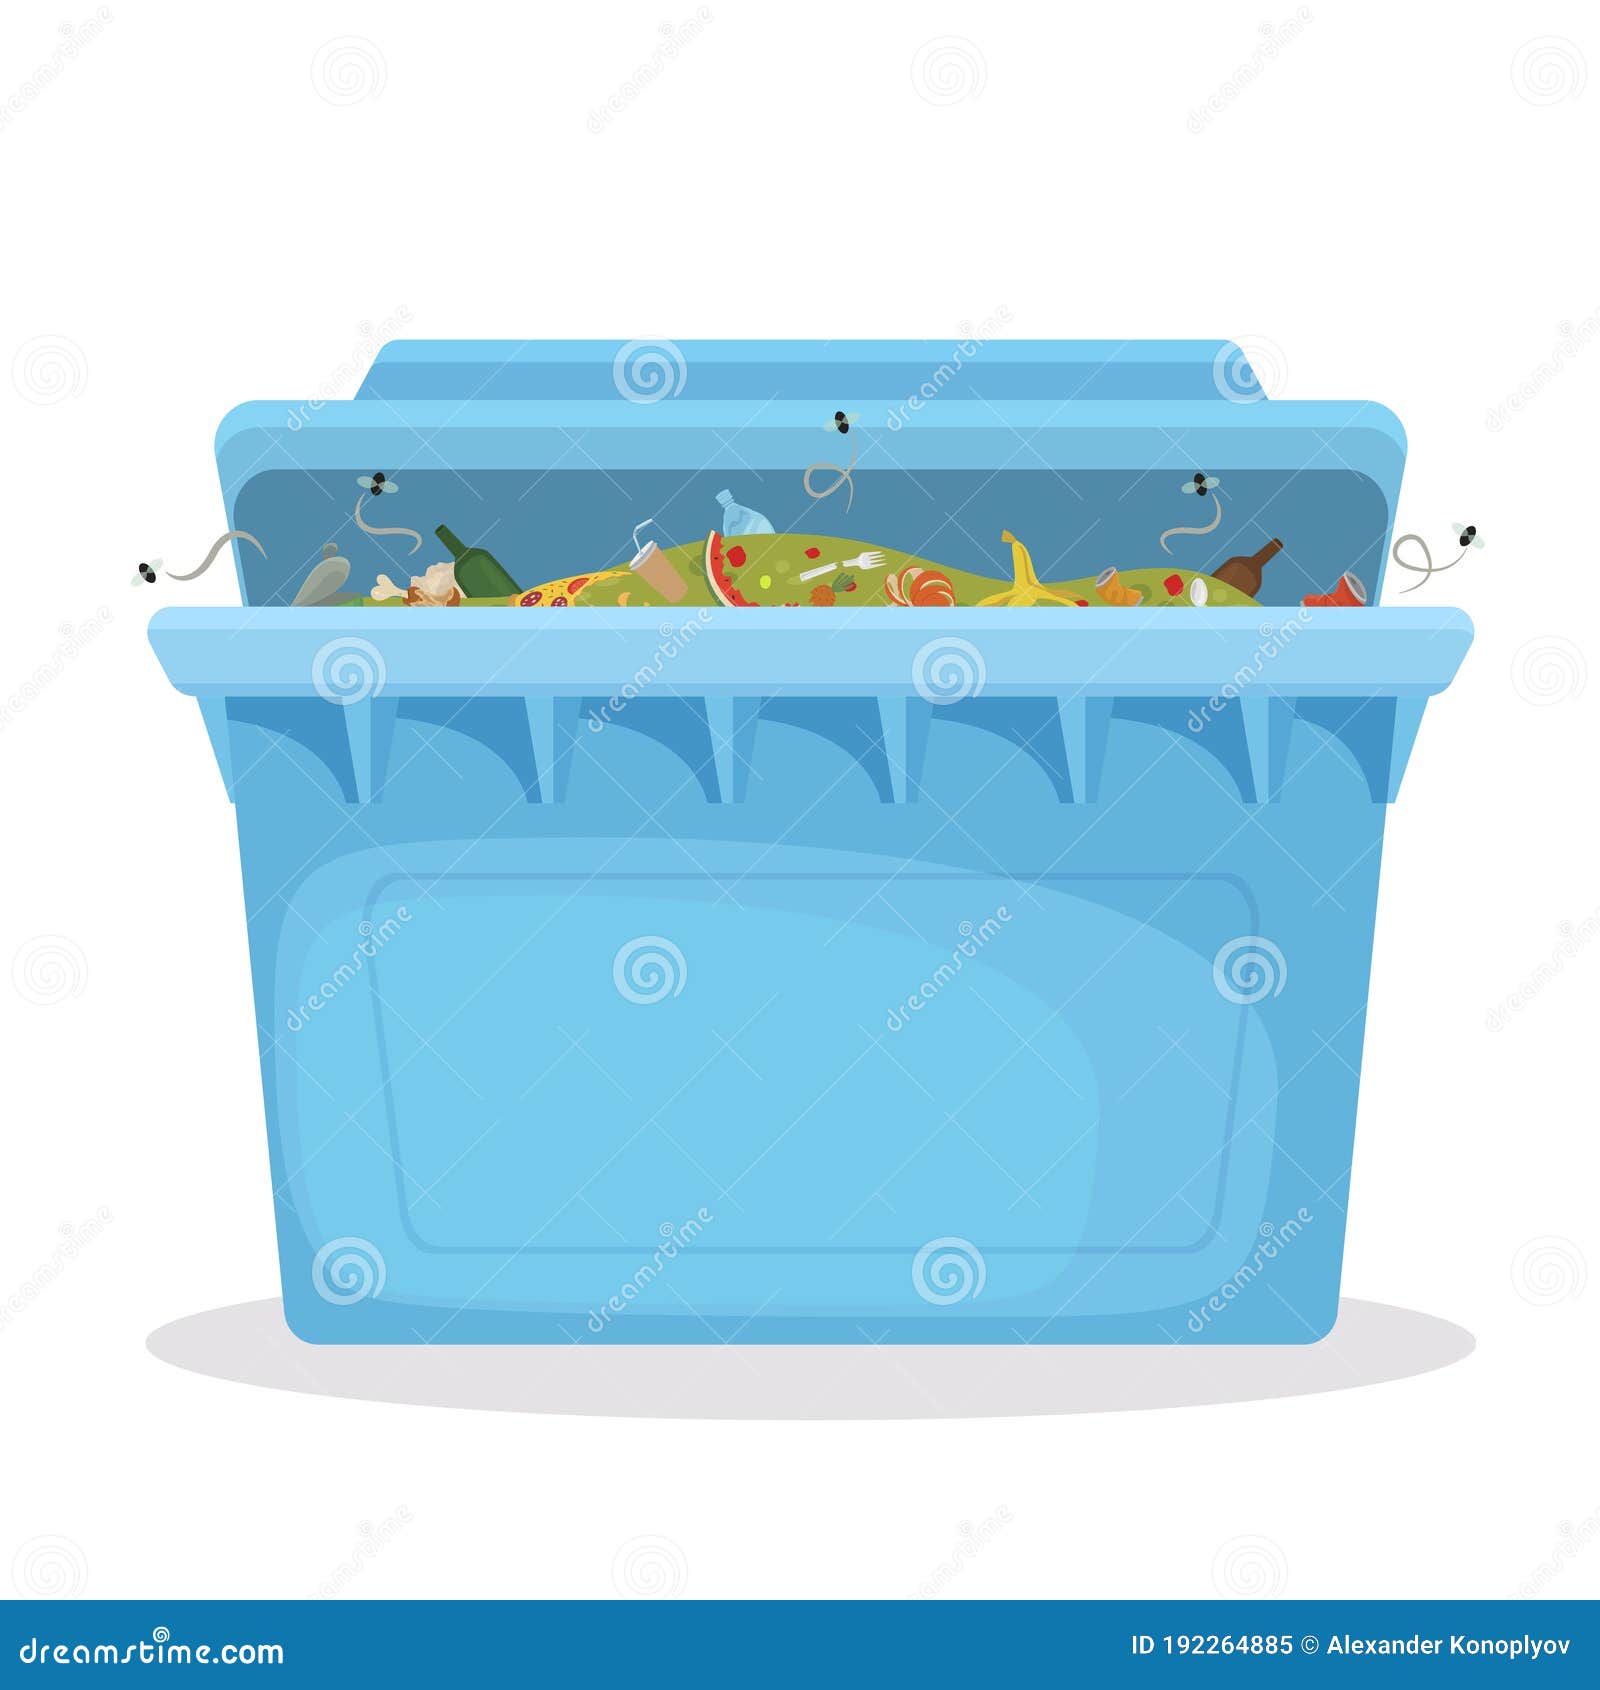 https://thumbs.dreamstime.com/z/waste-container-dumpster-blue-color-trash-can-ajar-rubbish-bin-full-garbage-waste-container-dumpster-blue-color-trash-can-192264885.jpg